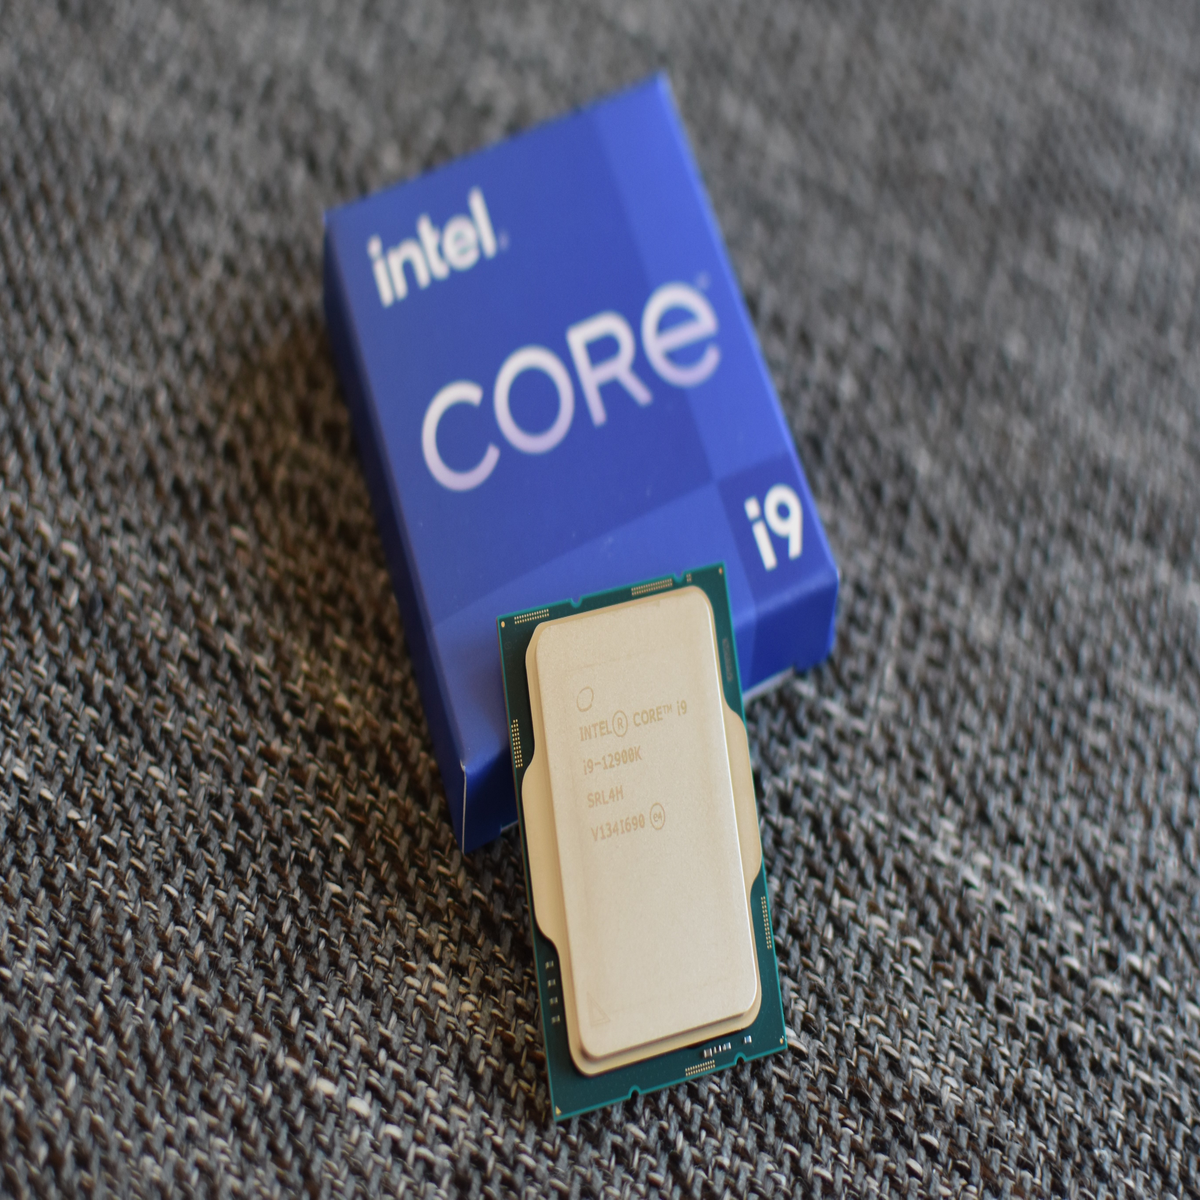 Intel Core i9-12900K scores high marks with overclocked DDR5 memory